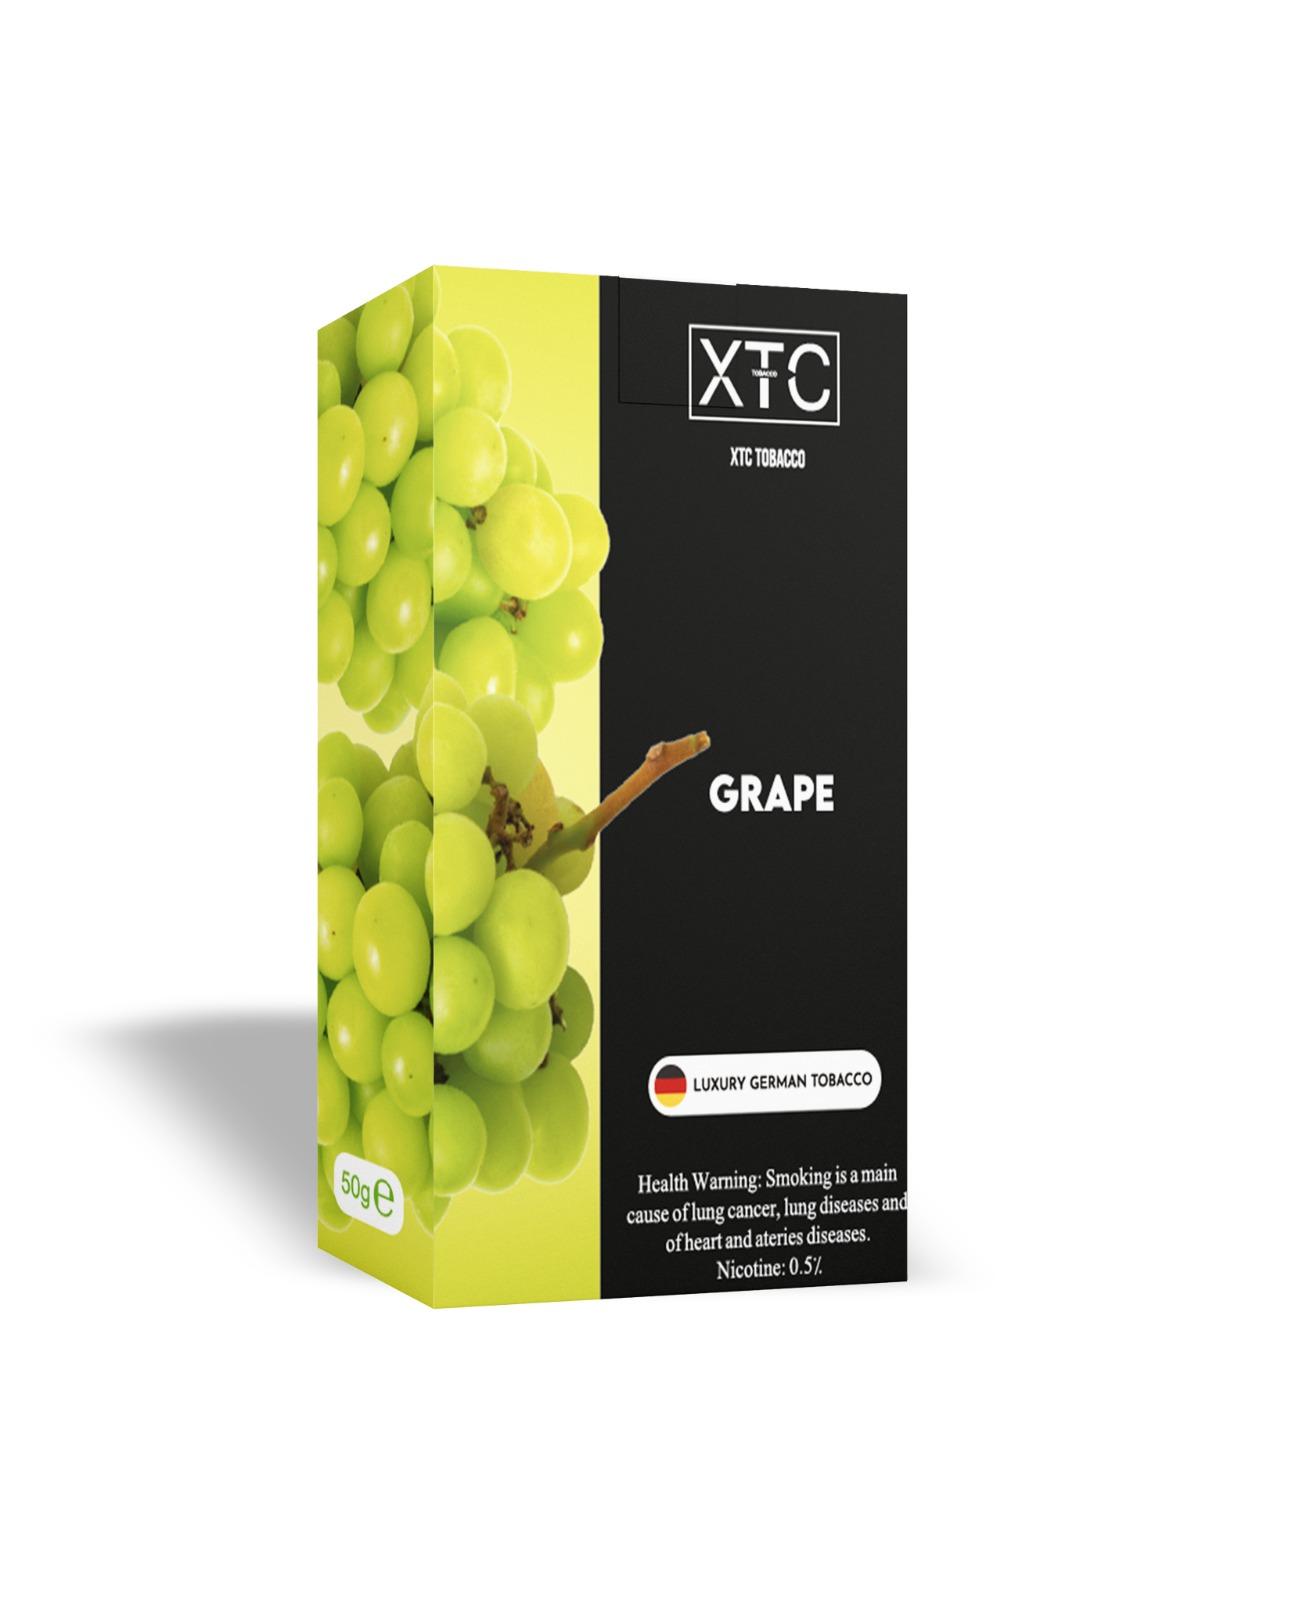 Image of XTC Tobacco product Grape